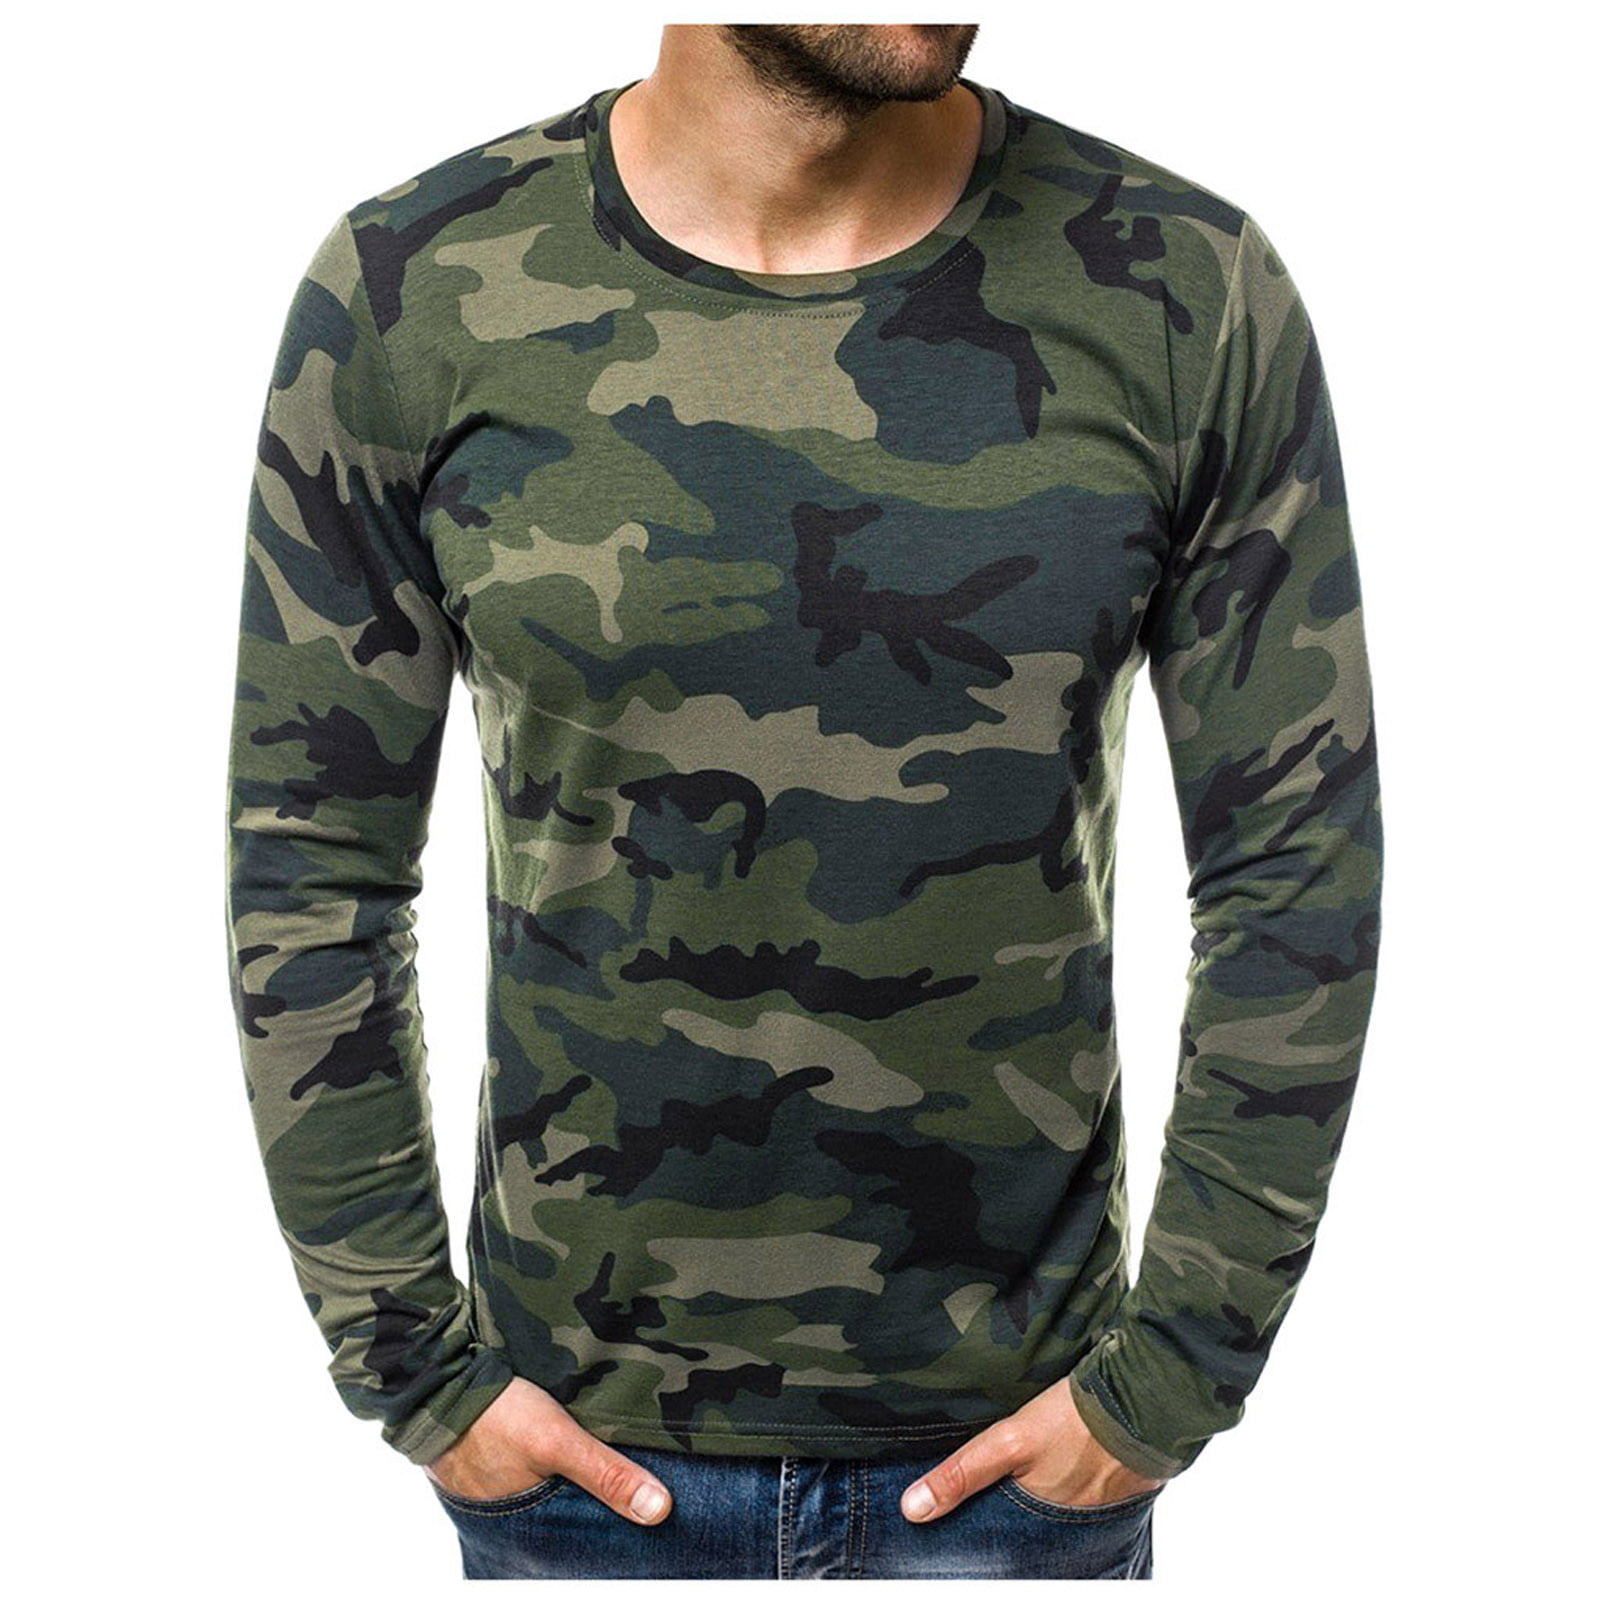 Case Camo Military Camouflage Mens T Shirts Graphic Funny Body Print Short T-Shirt Unisex Pullover Blouse 